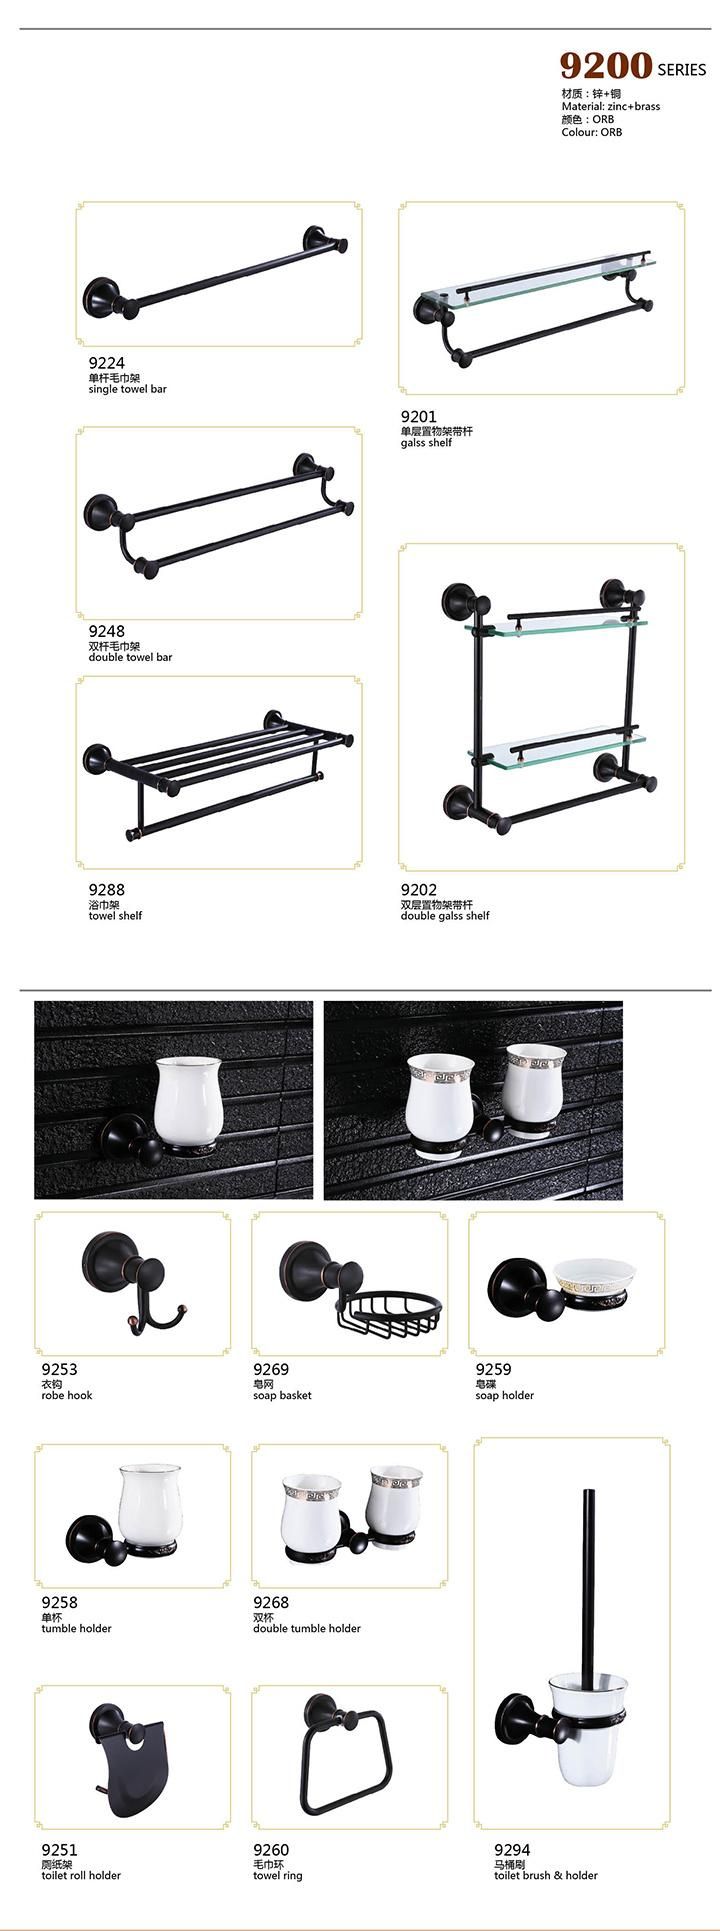 Luxury Design Black Color Brass and Zinc Bathroom Accessories for Hotel and Home H9100 Series